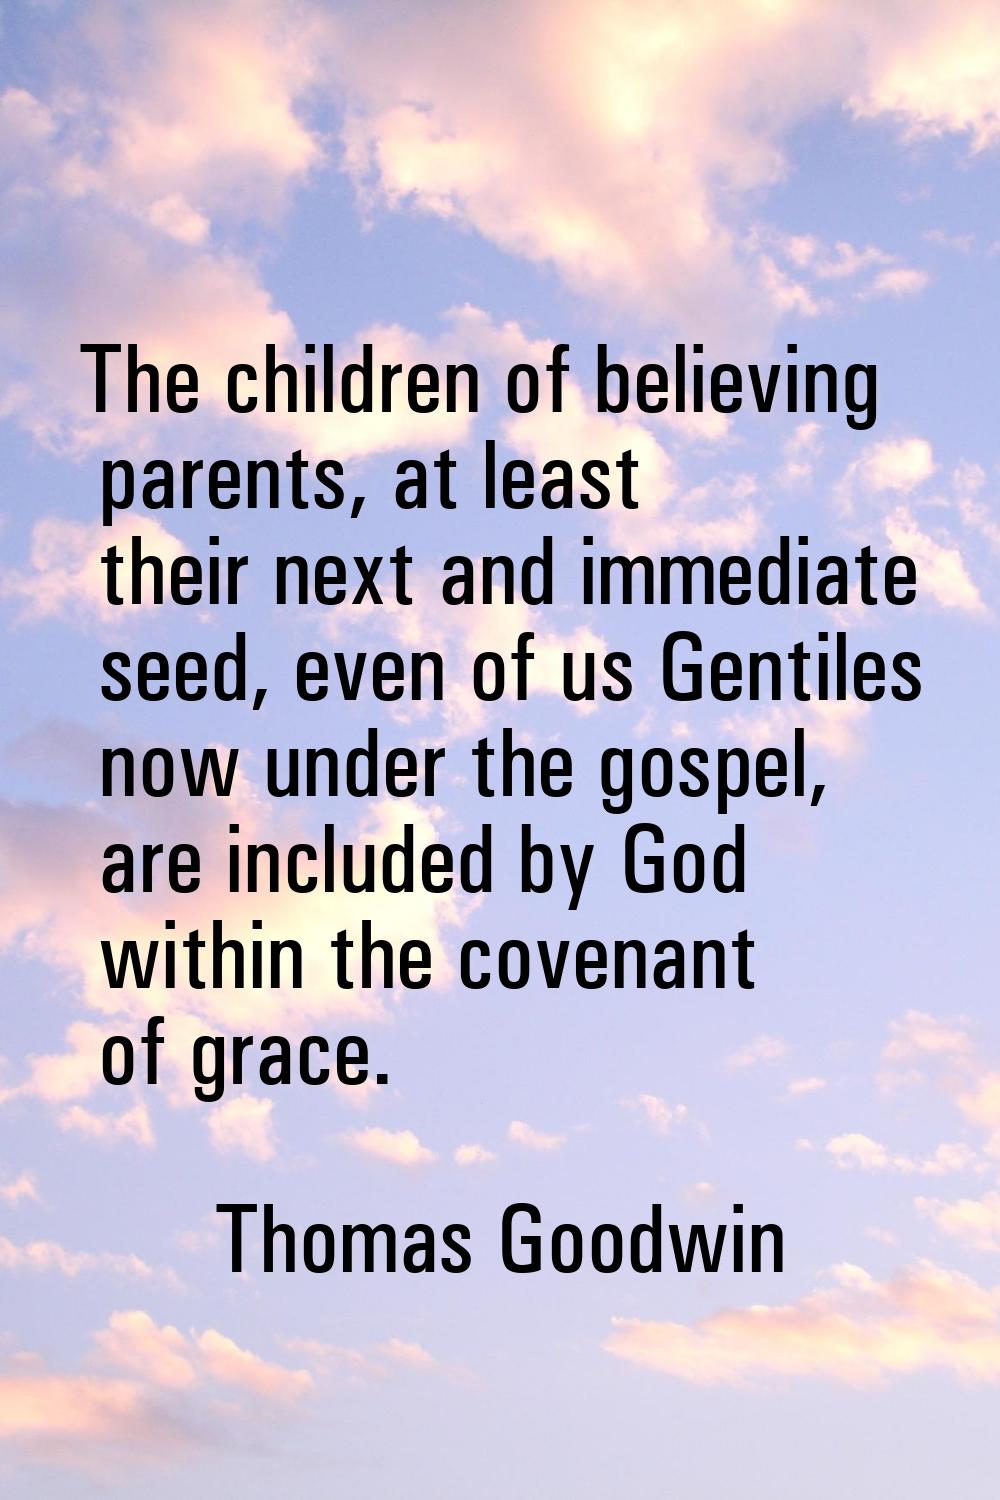 The children of believing parents, at least their next and immediate seed, even of us Gentiles now 